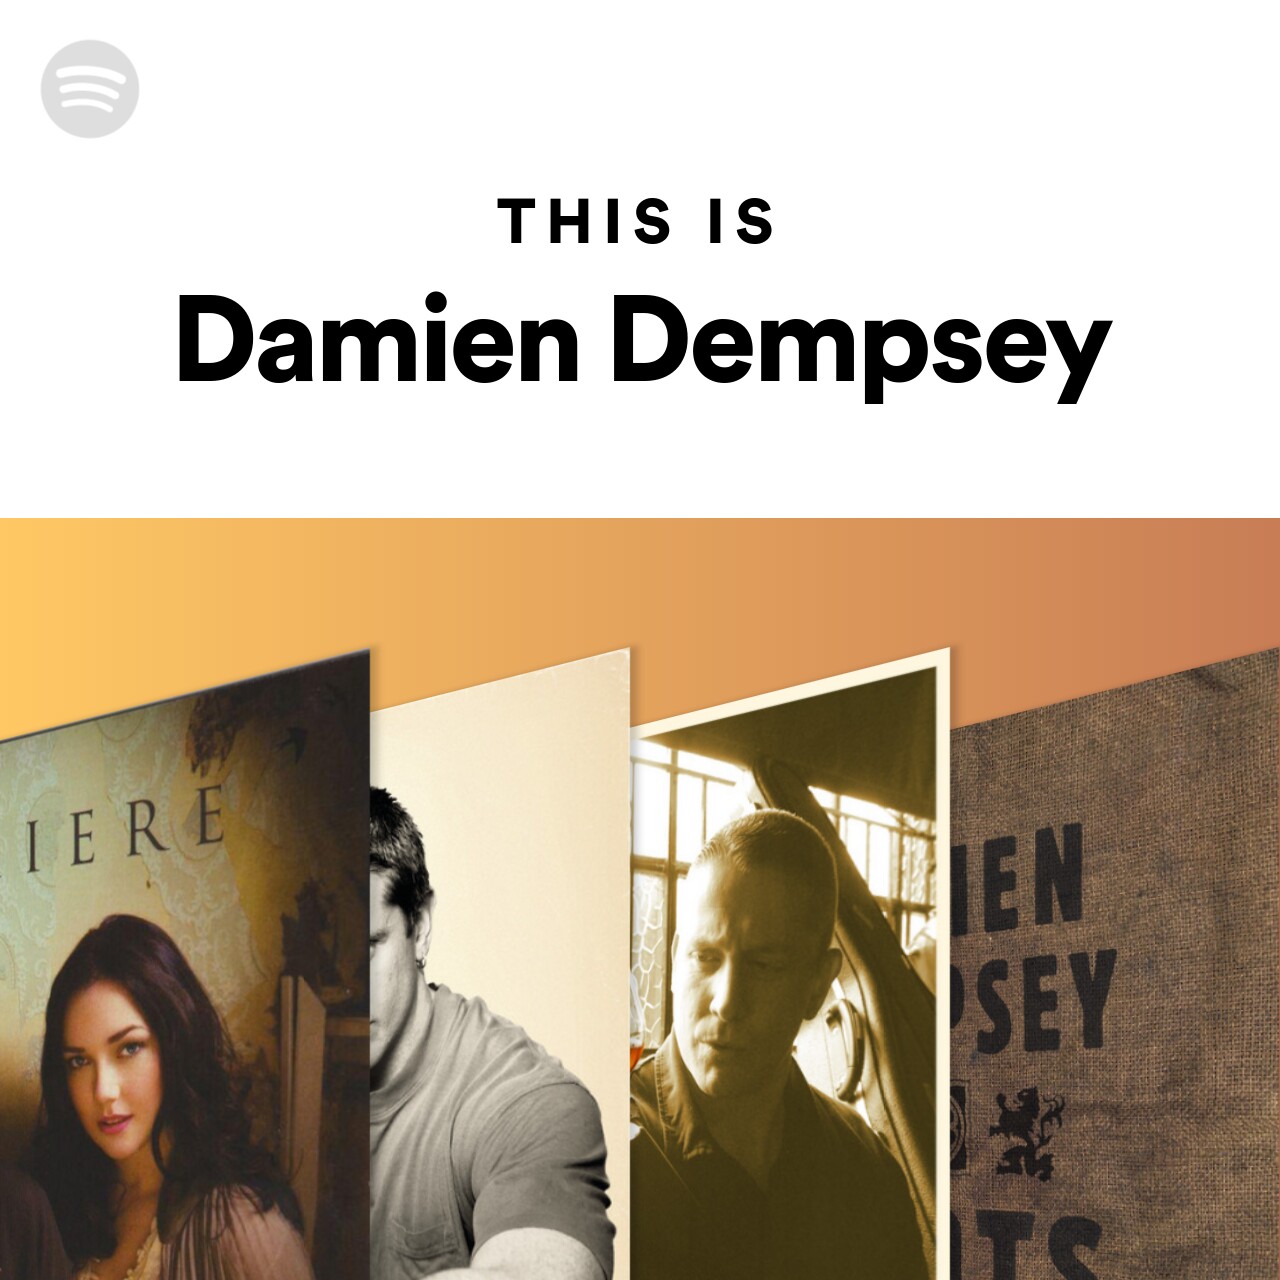 This Is Damien Dempsey